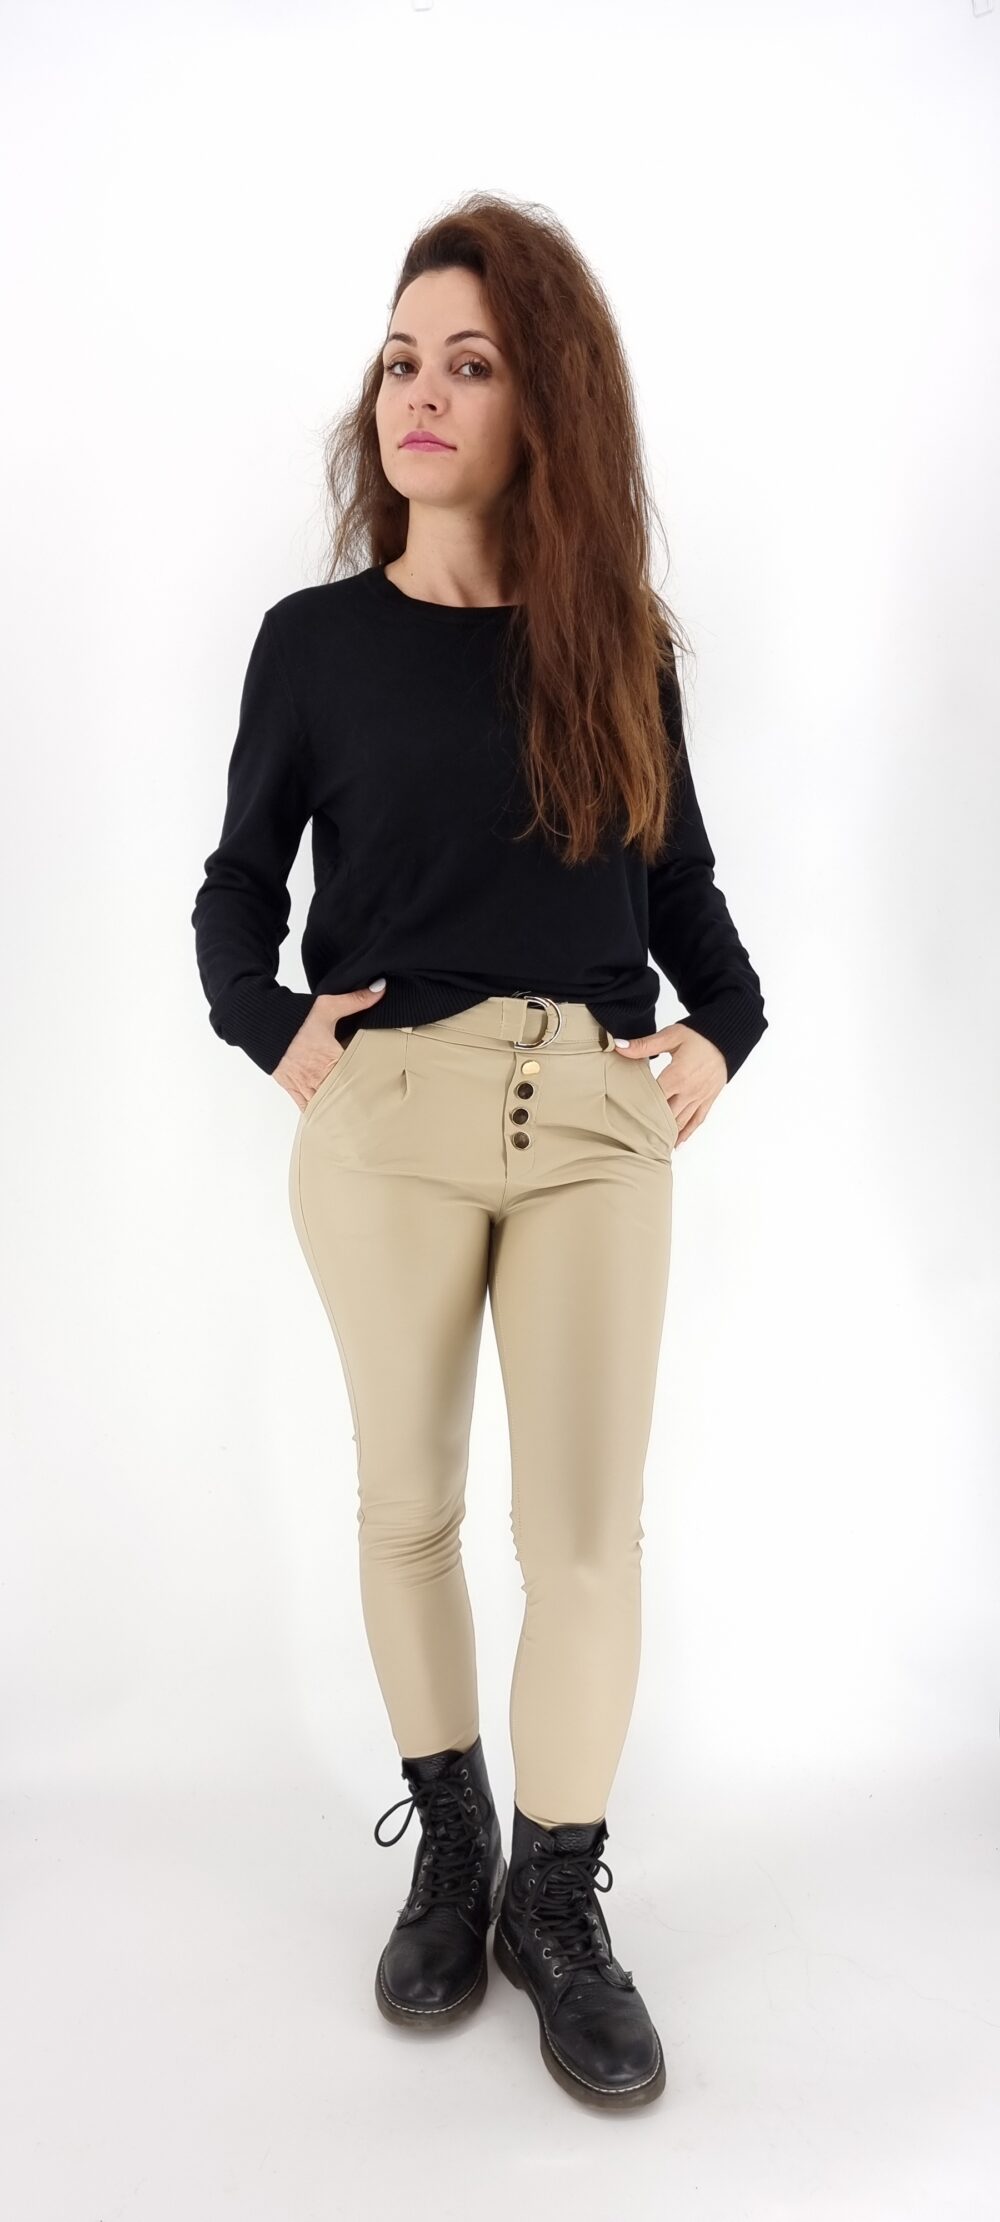 Leather leggings with gold decorative buttons and belt beige